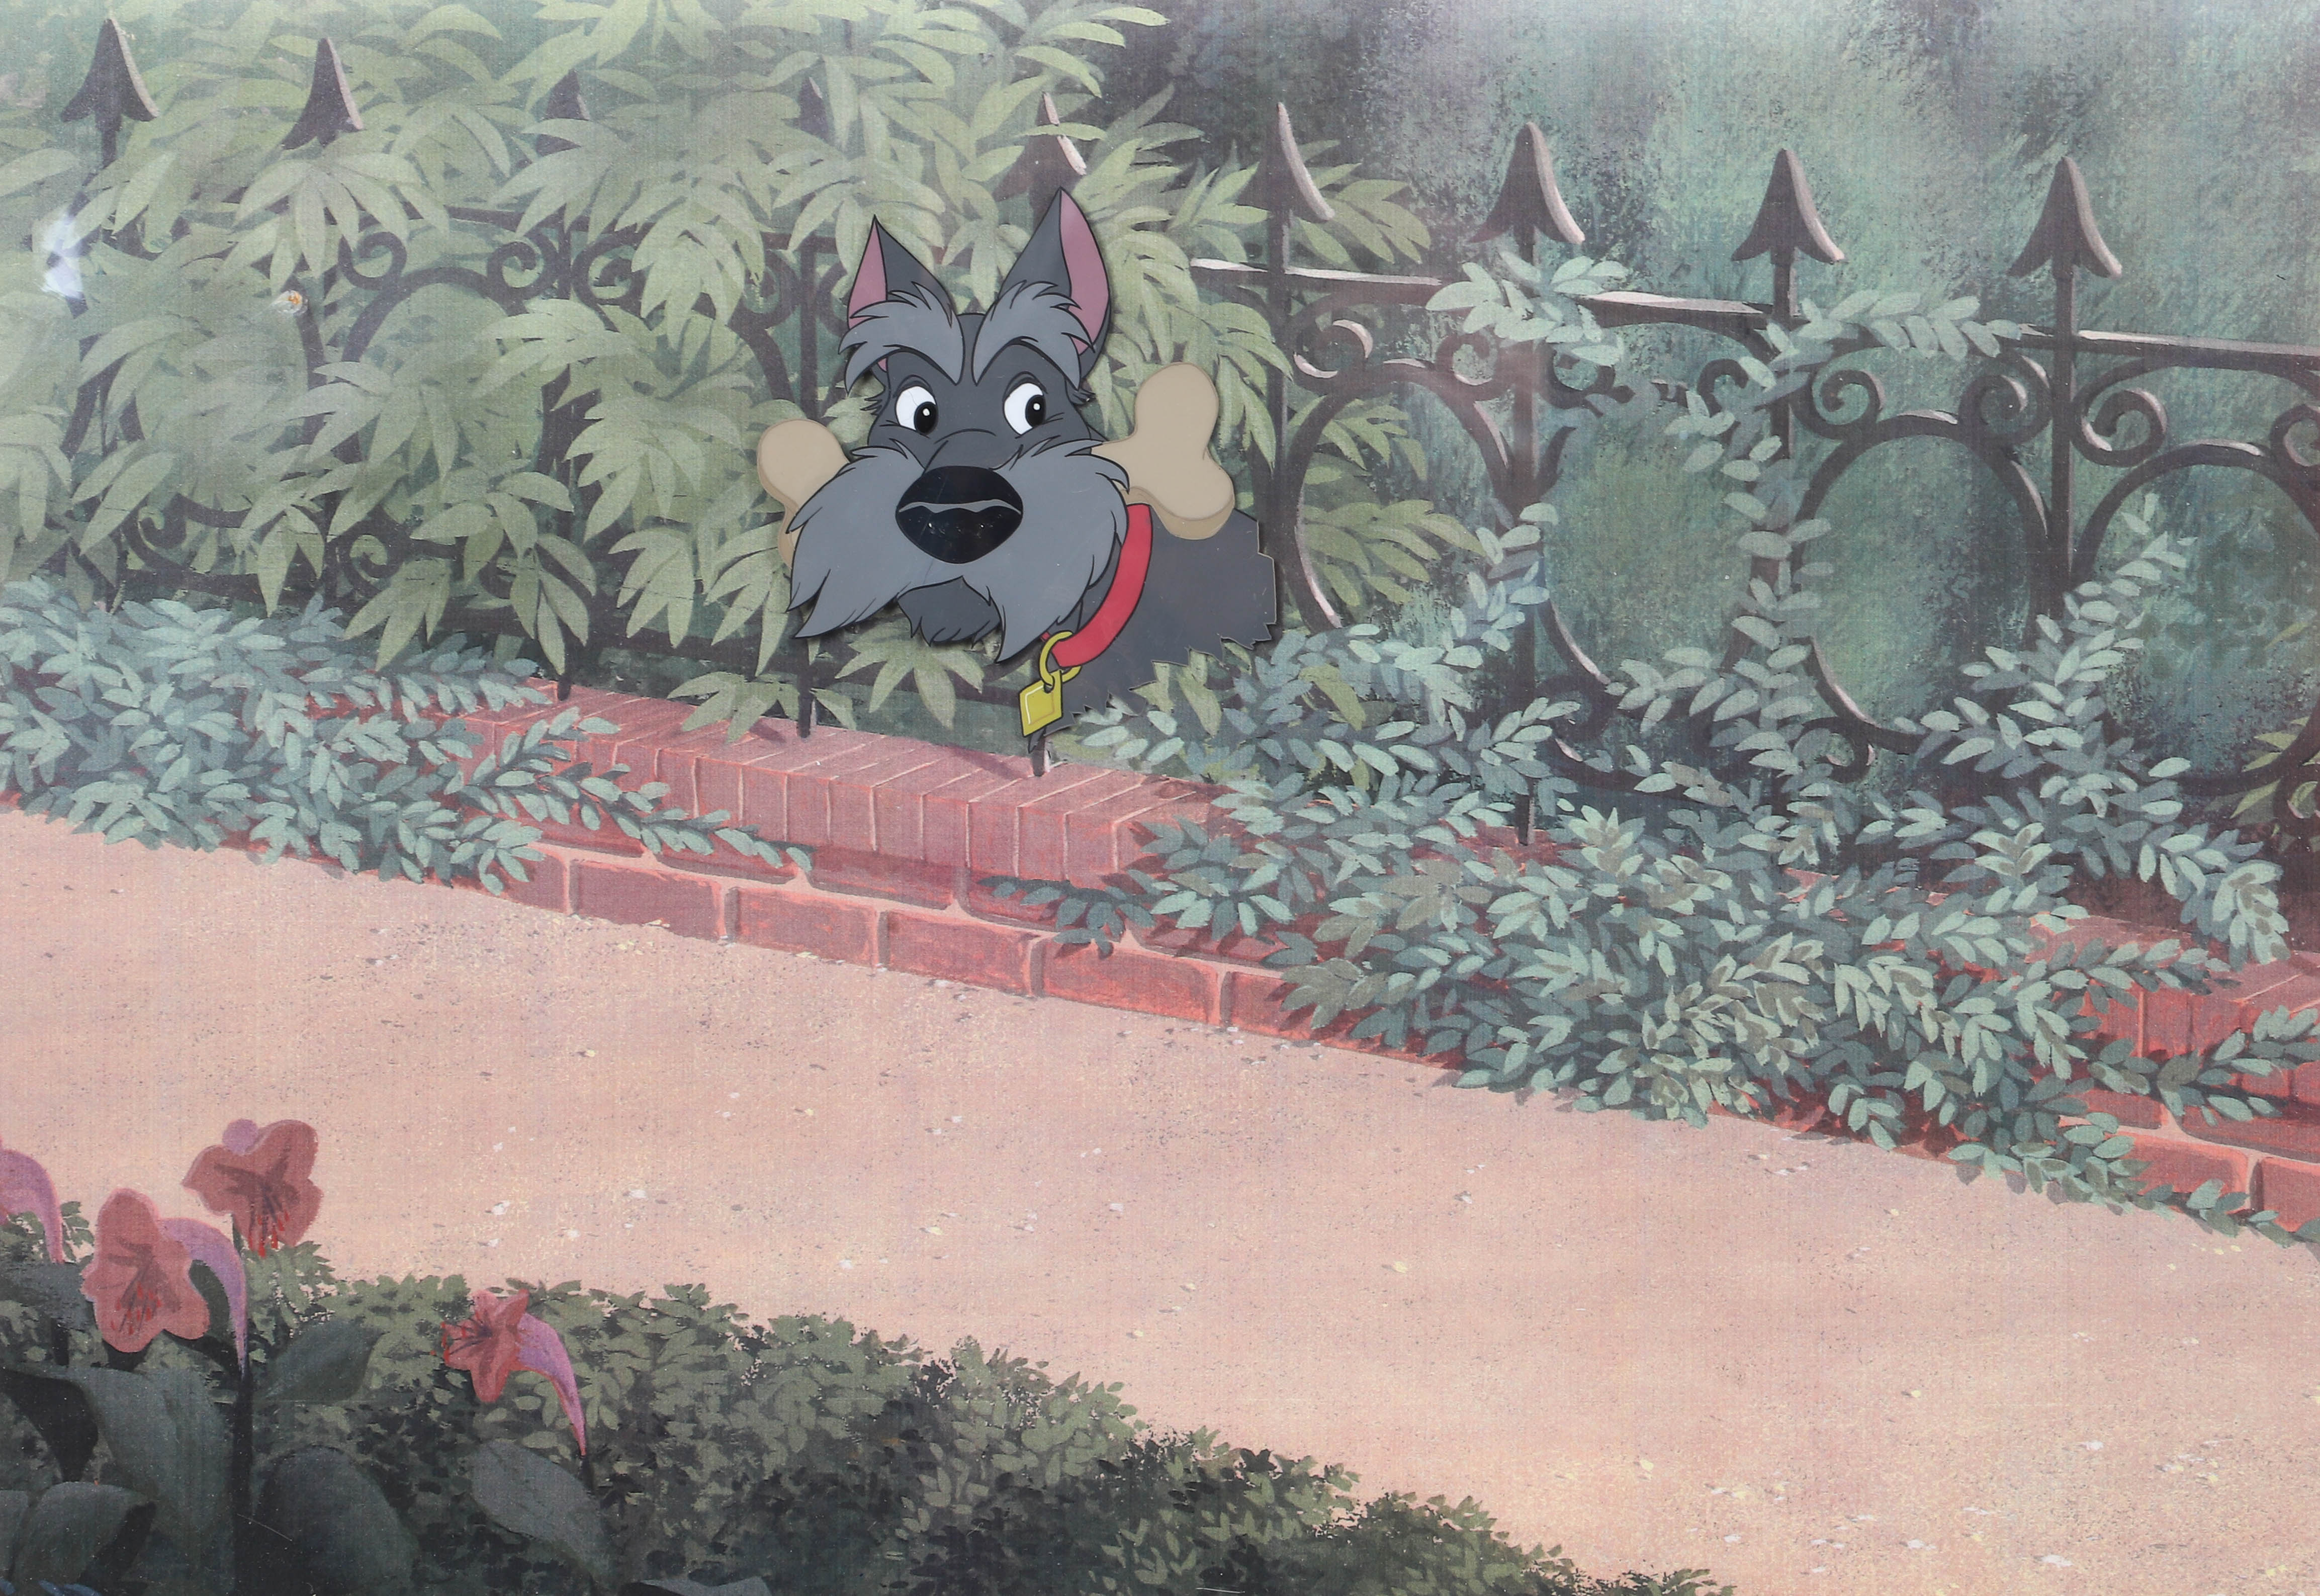 Lady and the Tramp production cel 2e1ca8